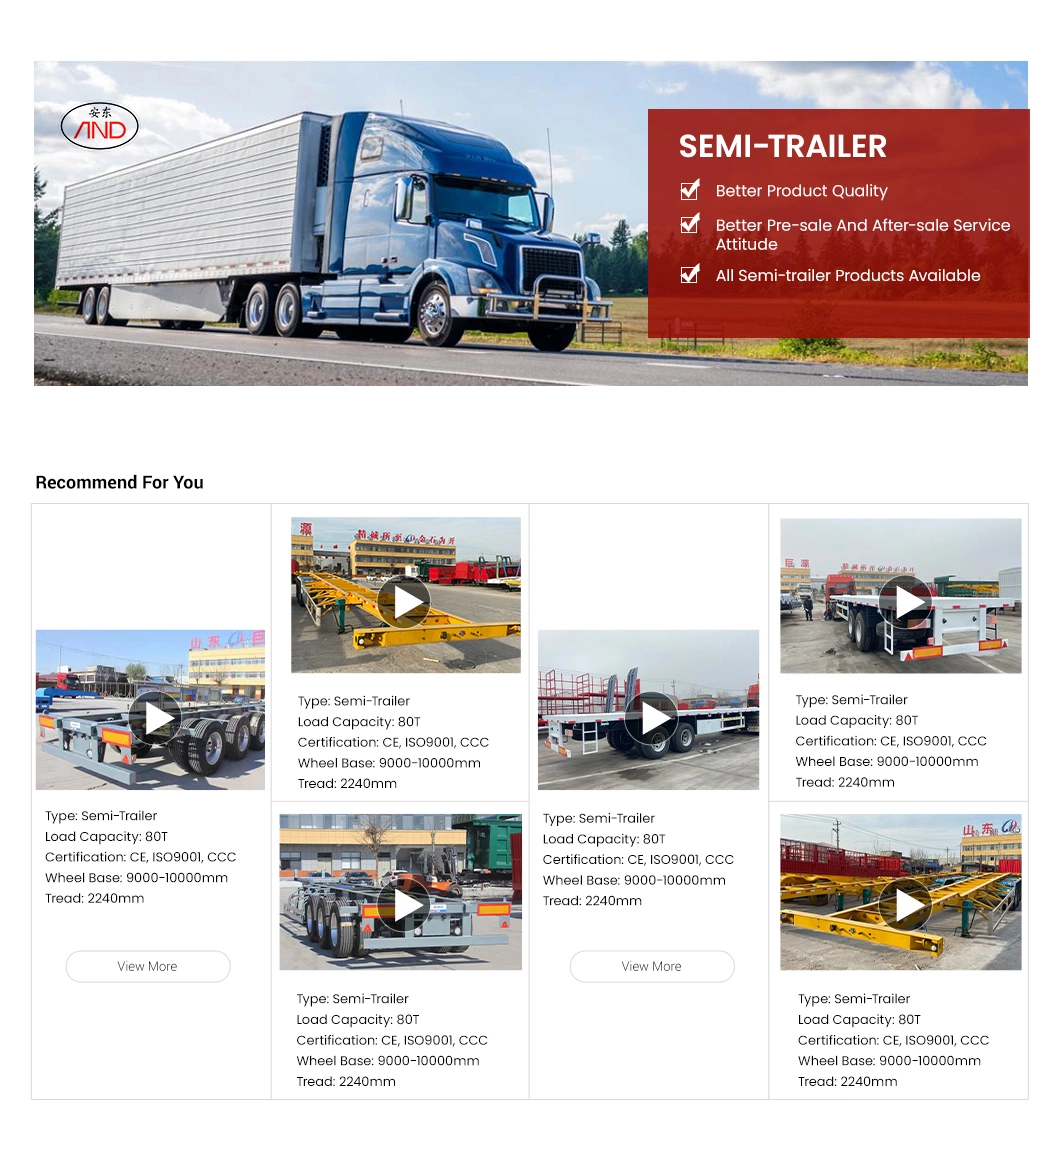 Anton Selling Sinotruk, Howard, a Modified Custom Make All Kinds of Models, Making All Kinds of Frame